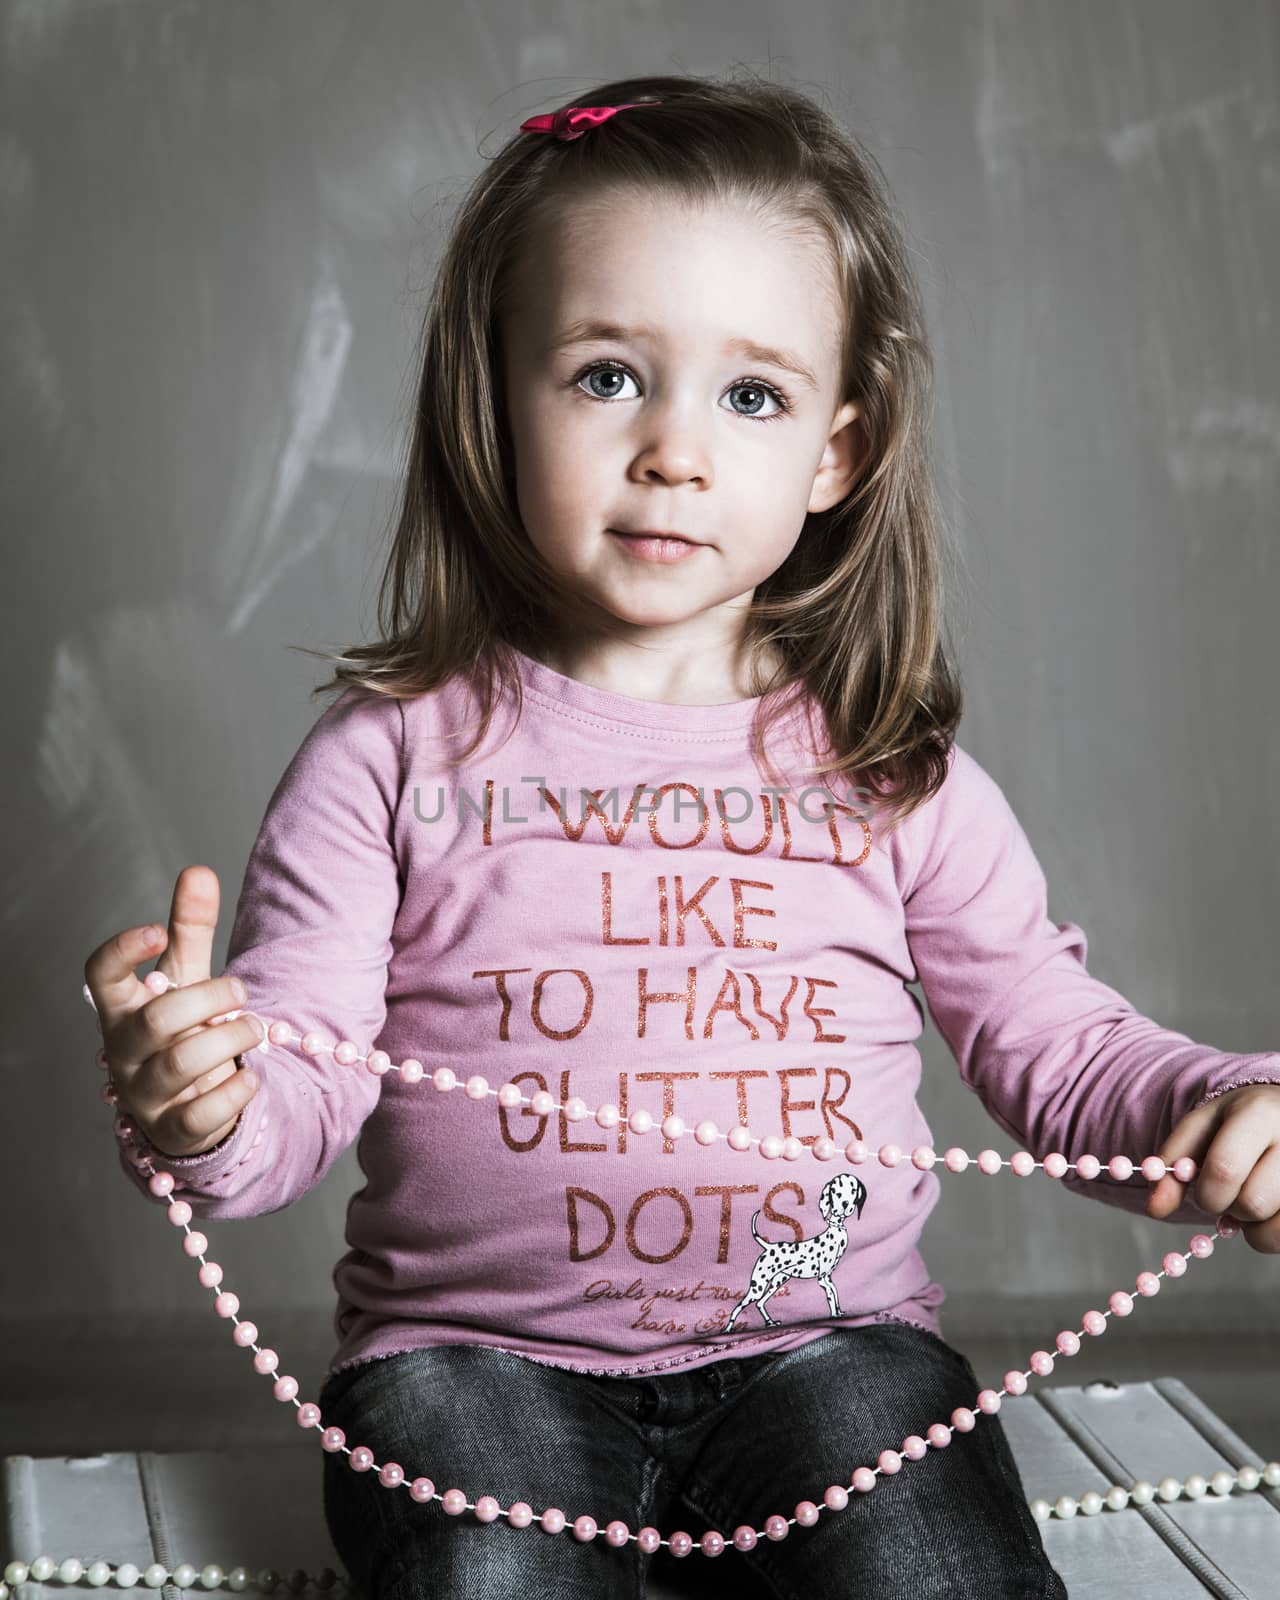 Girl playing with a pearl necklace. Image taken in the studio.